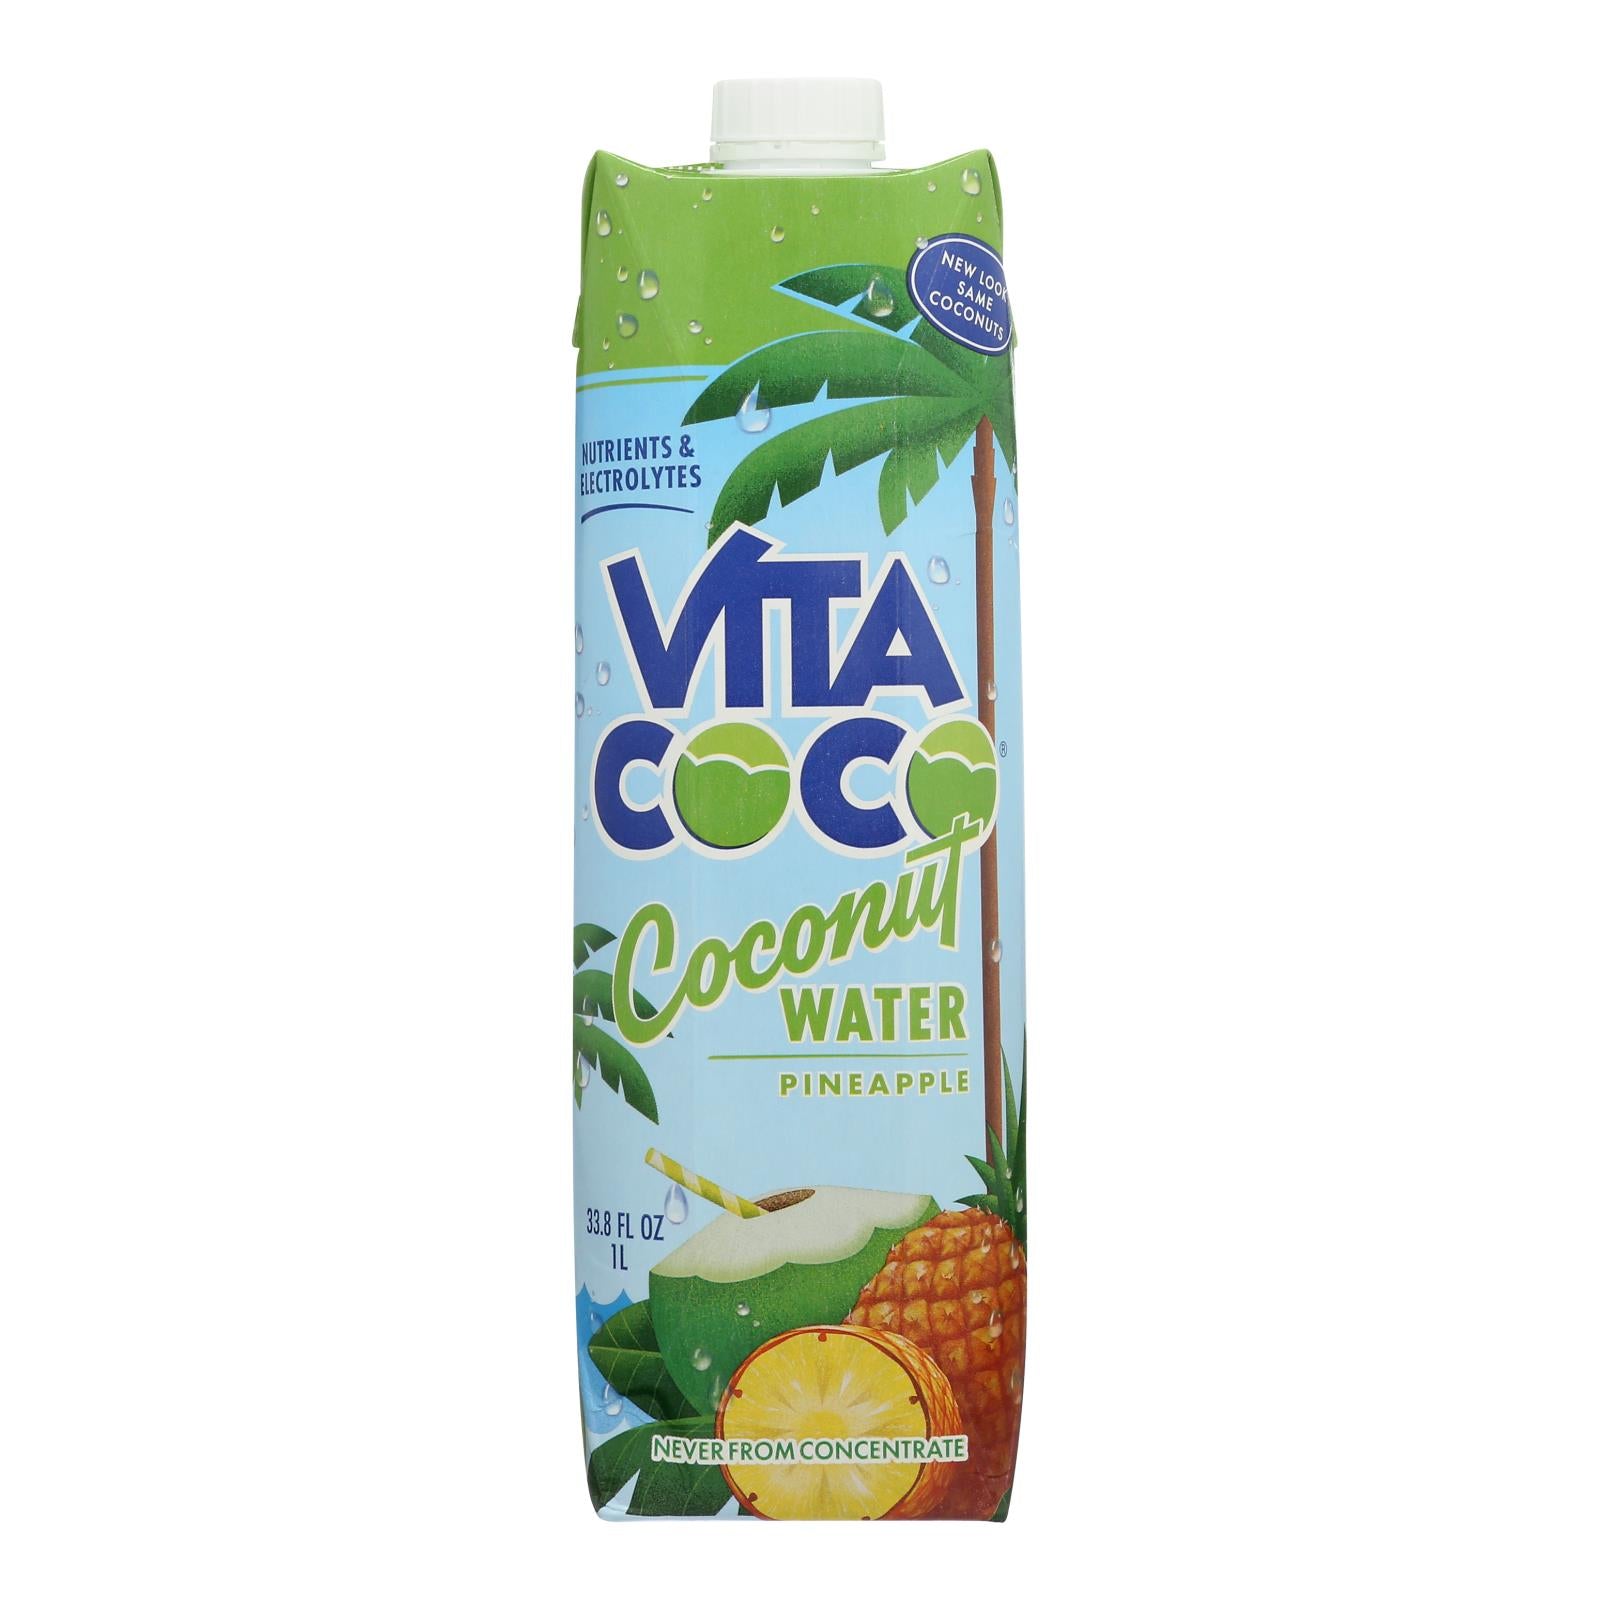 Vita Coco Coconut Water - with Pineapple - Case of 12 - 1 LT